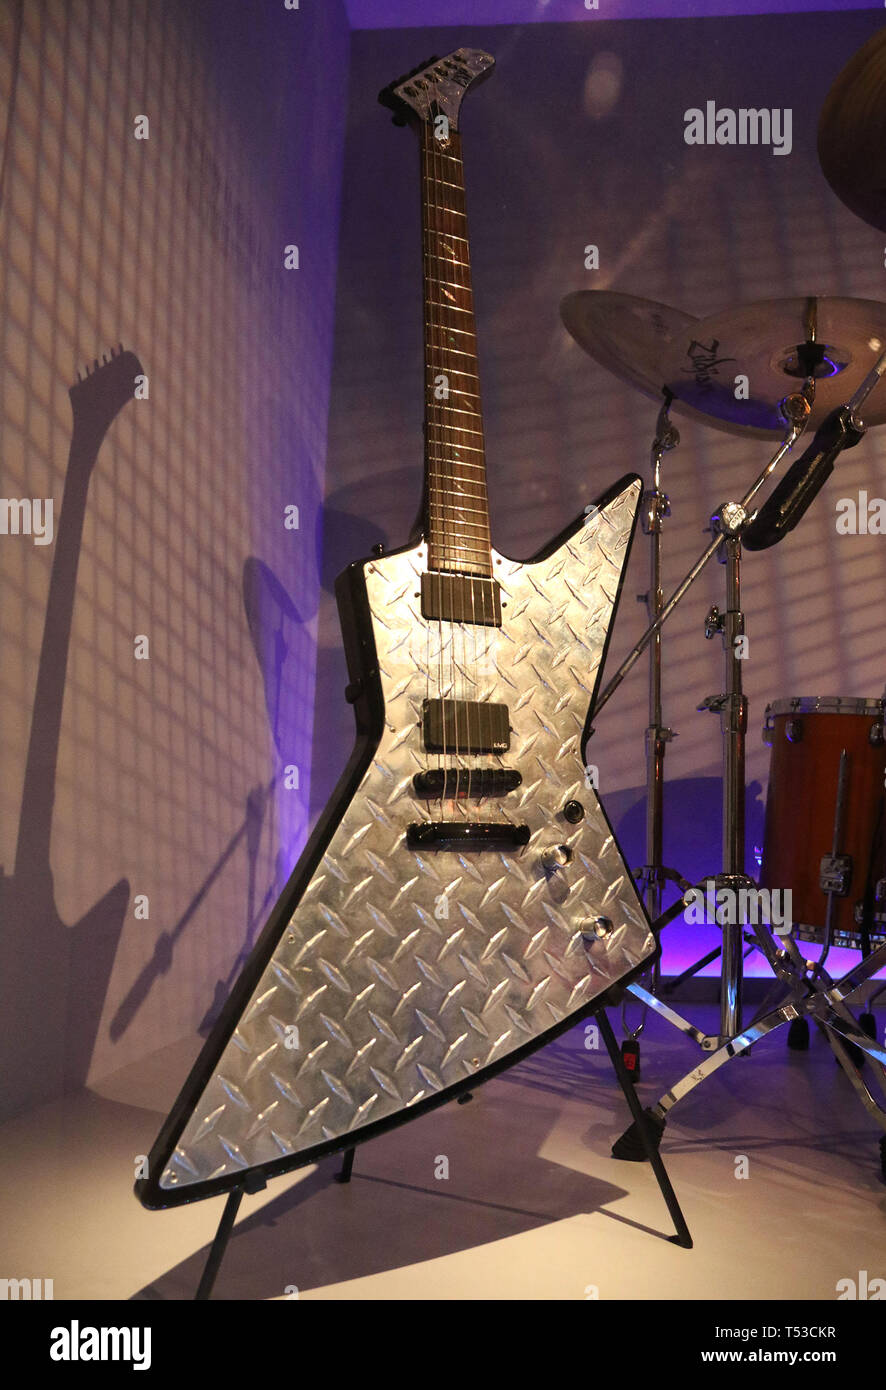 April 19 New York City New York U S Jh 2 Esp Custom Shop Electric Guitar Used By James Hetfield From Metallica On Display At The Play It Loud Instruments Of